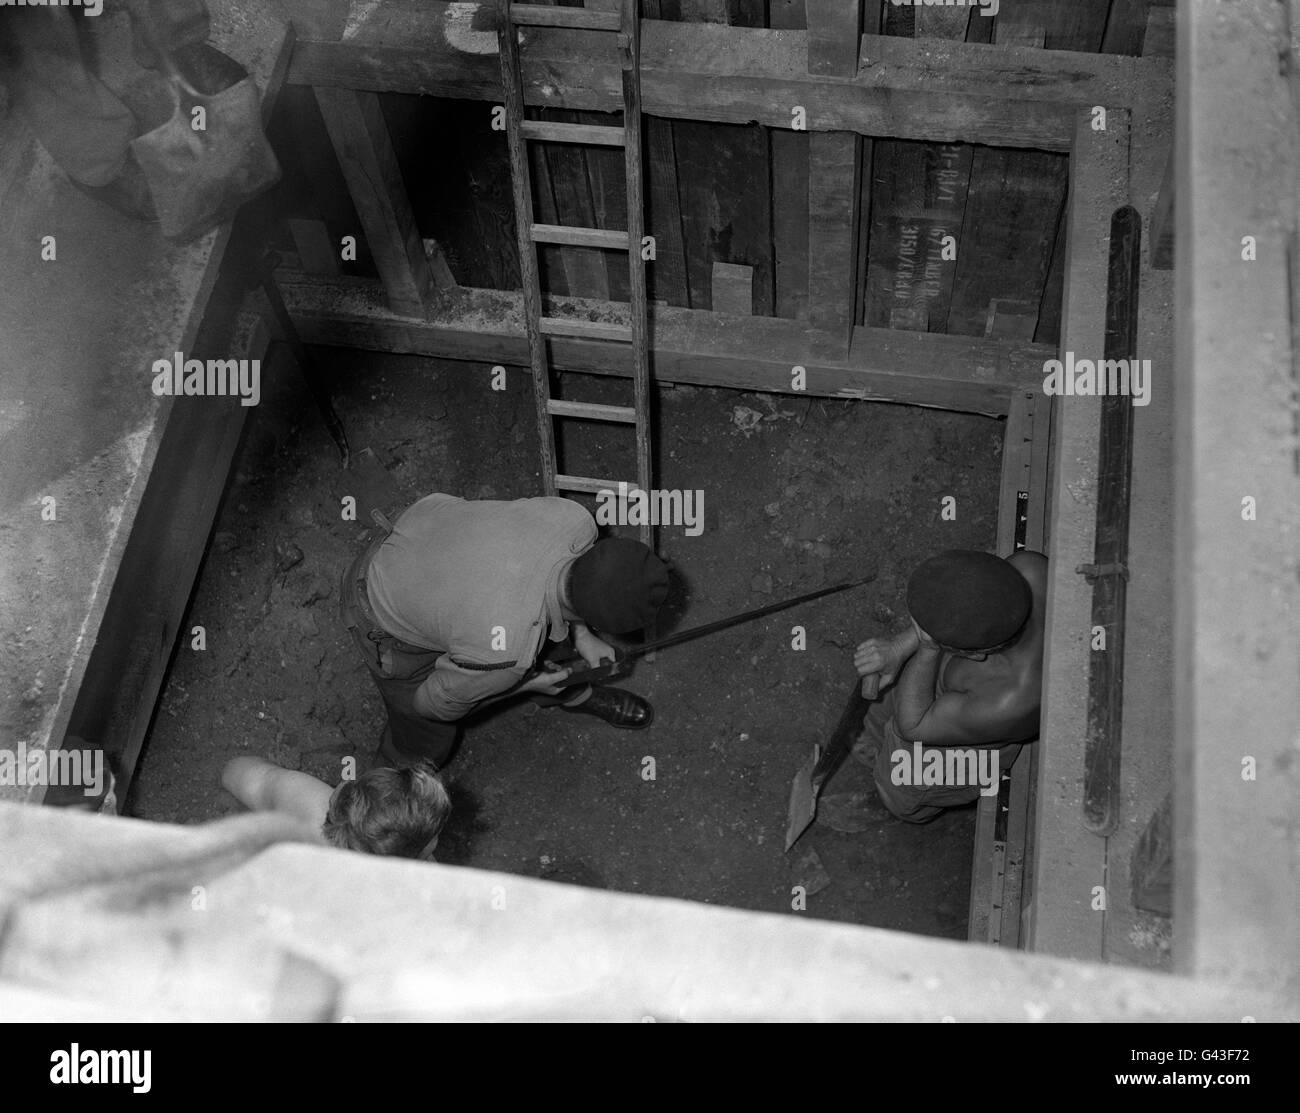 Corporal Gordon Townley at the bottom of a deep excavation probing for a German bomb near the Tate Gallery, London. Stock Photo